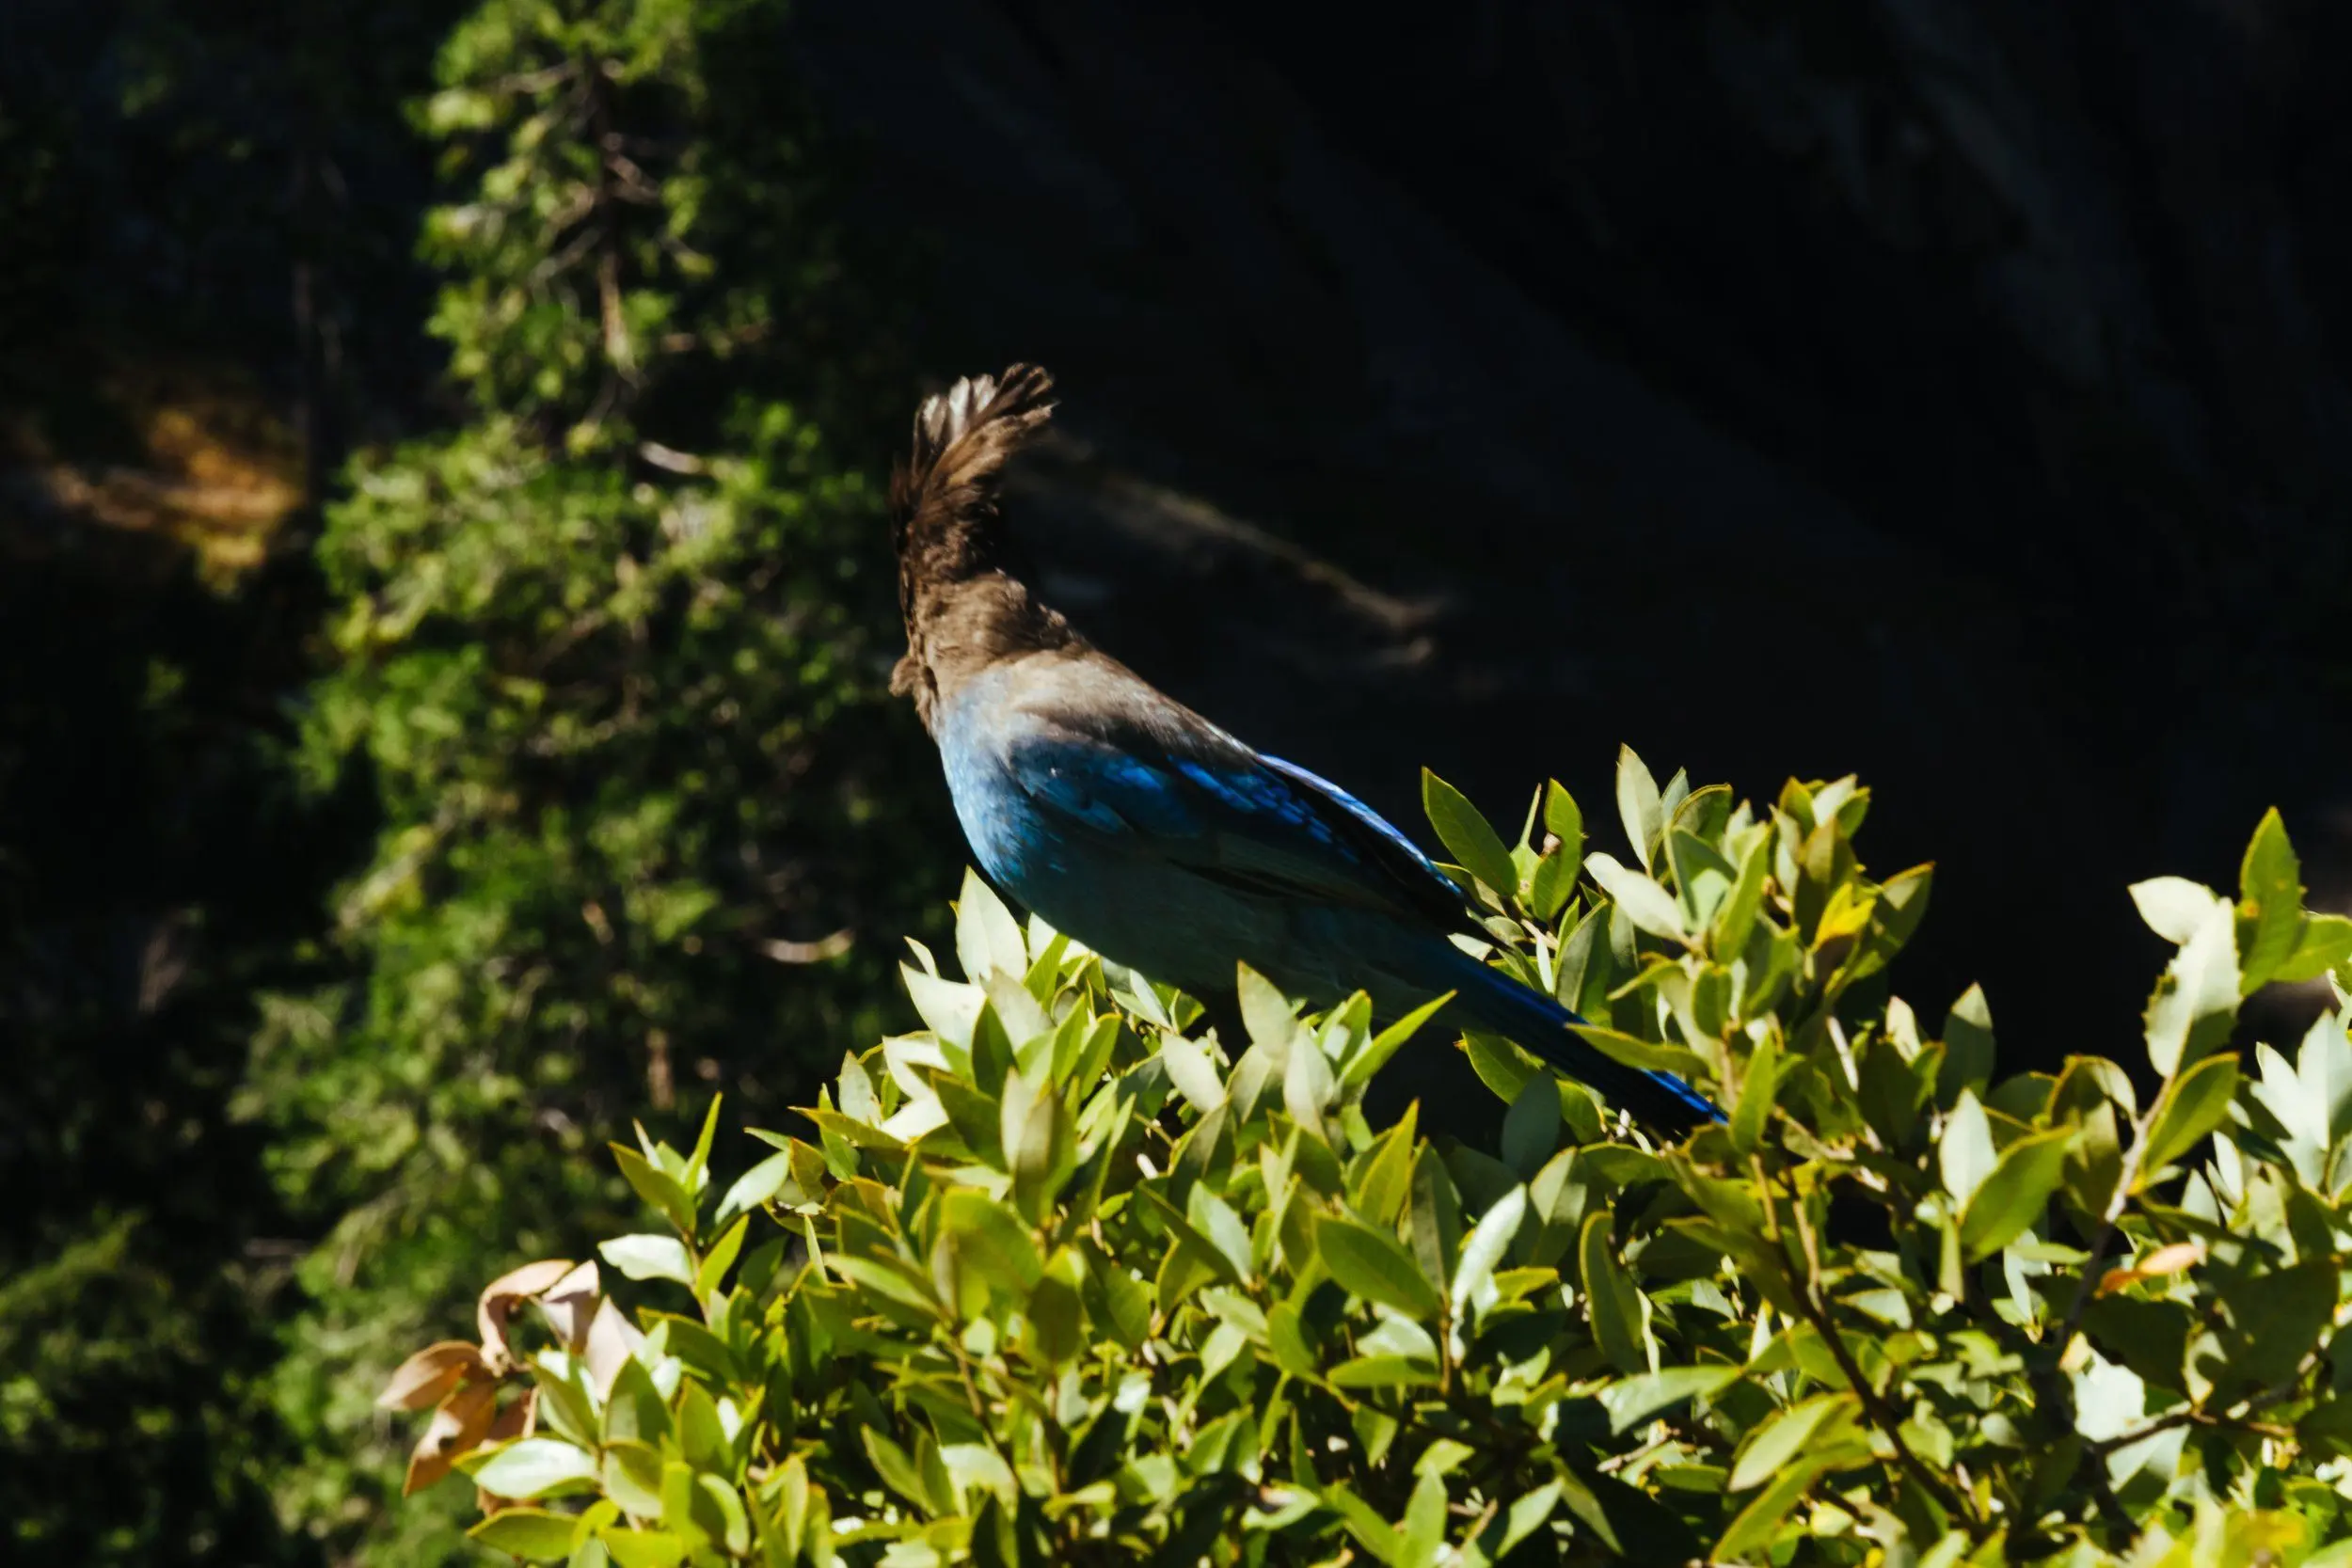 A Stellar Jay perches on the top leaves of a tree.